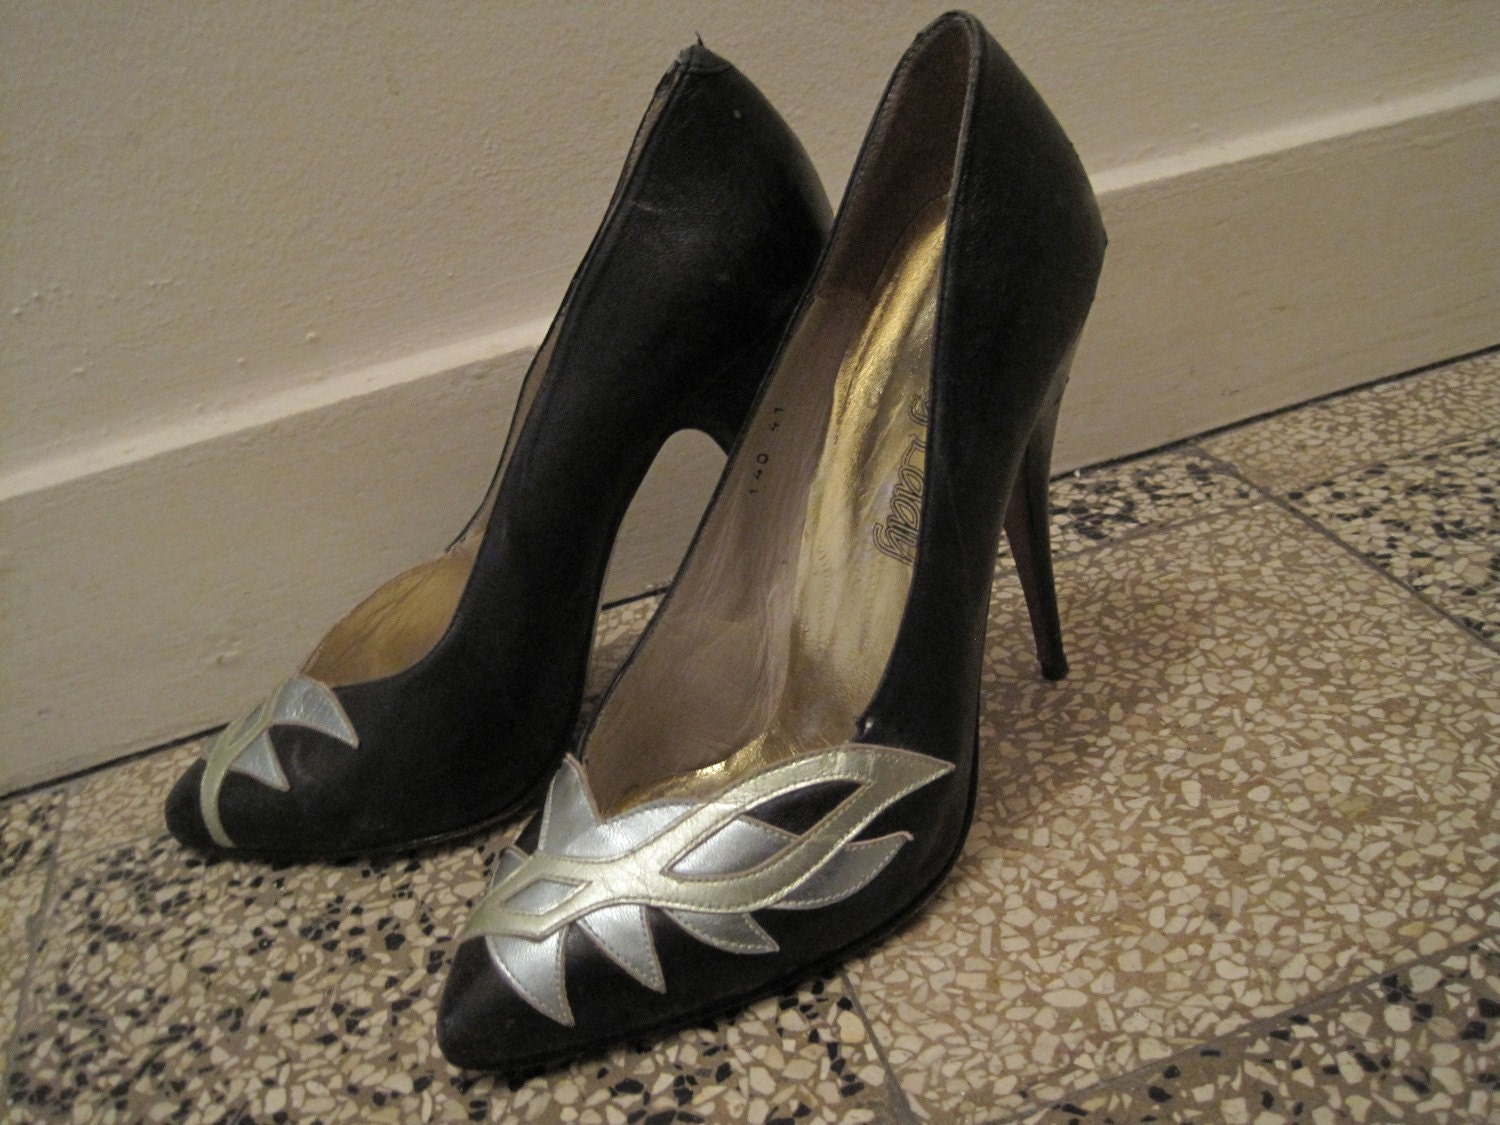 Vintage sexy high heel pumps 80s cut out detail size 9 1/2